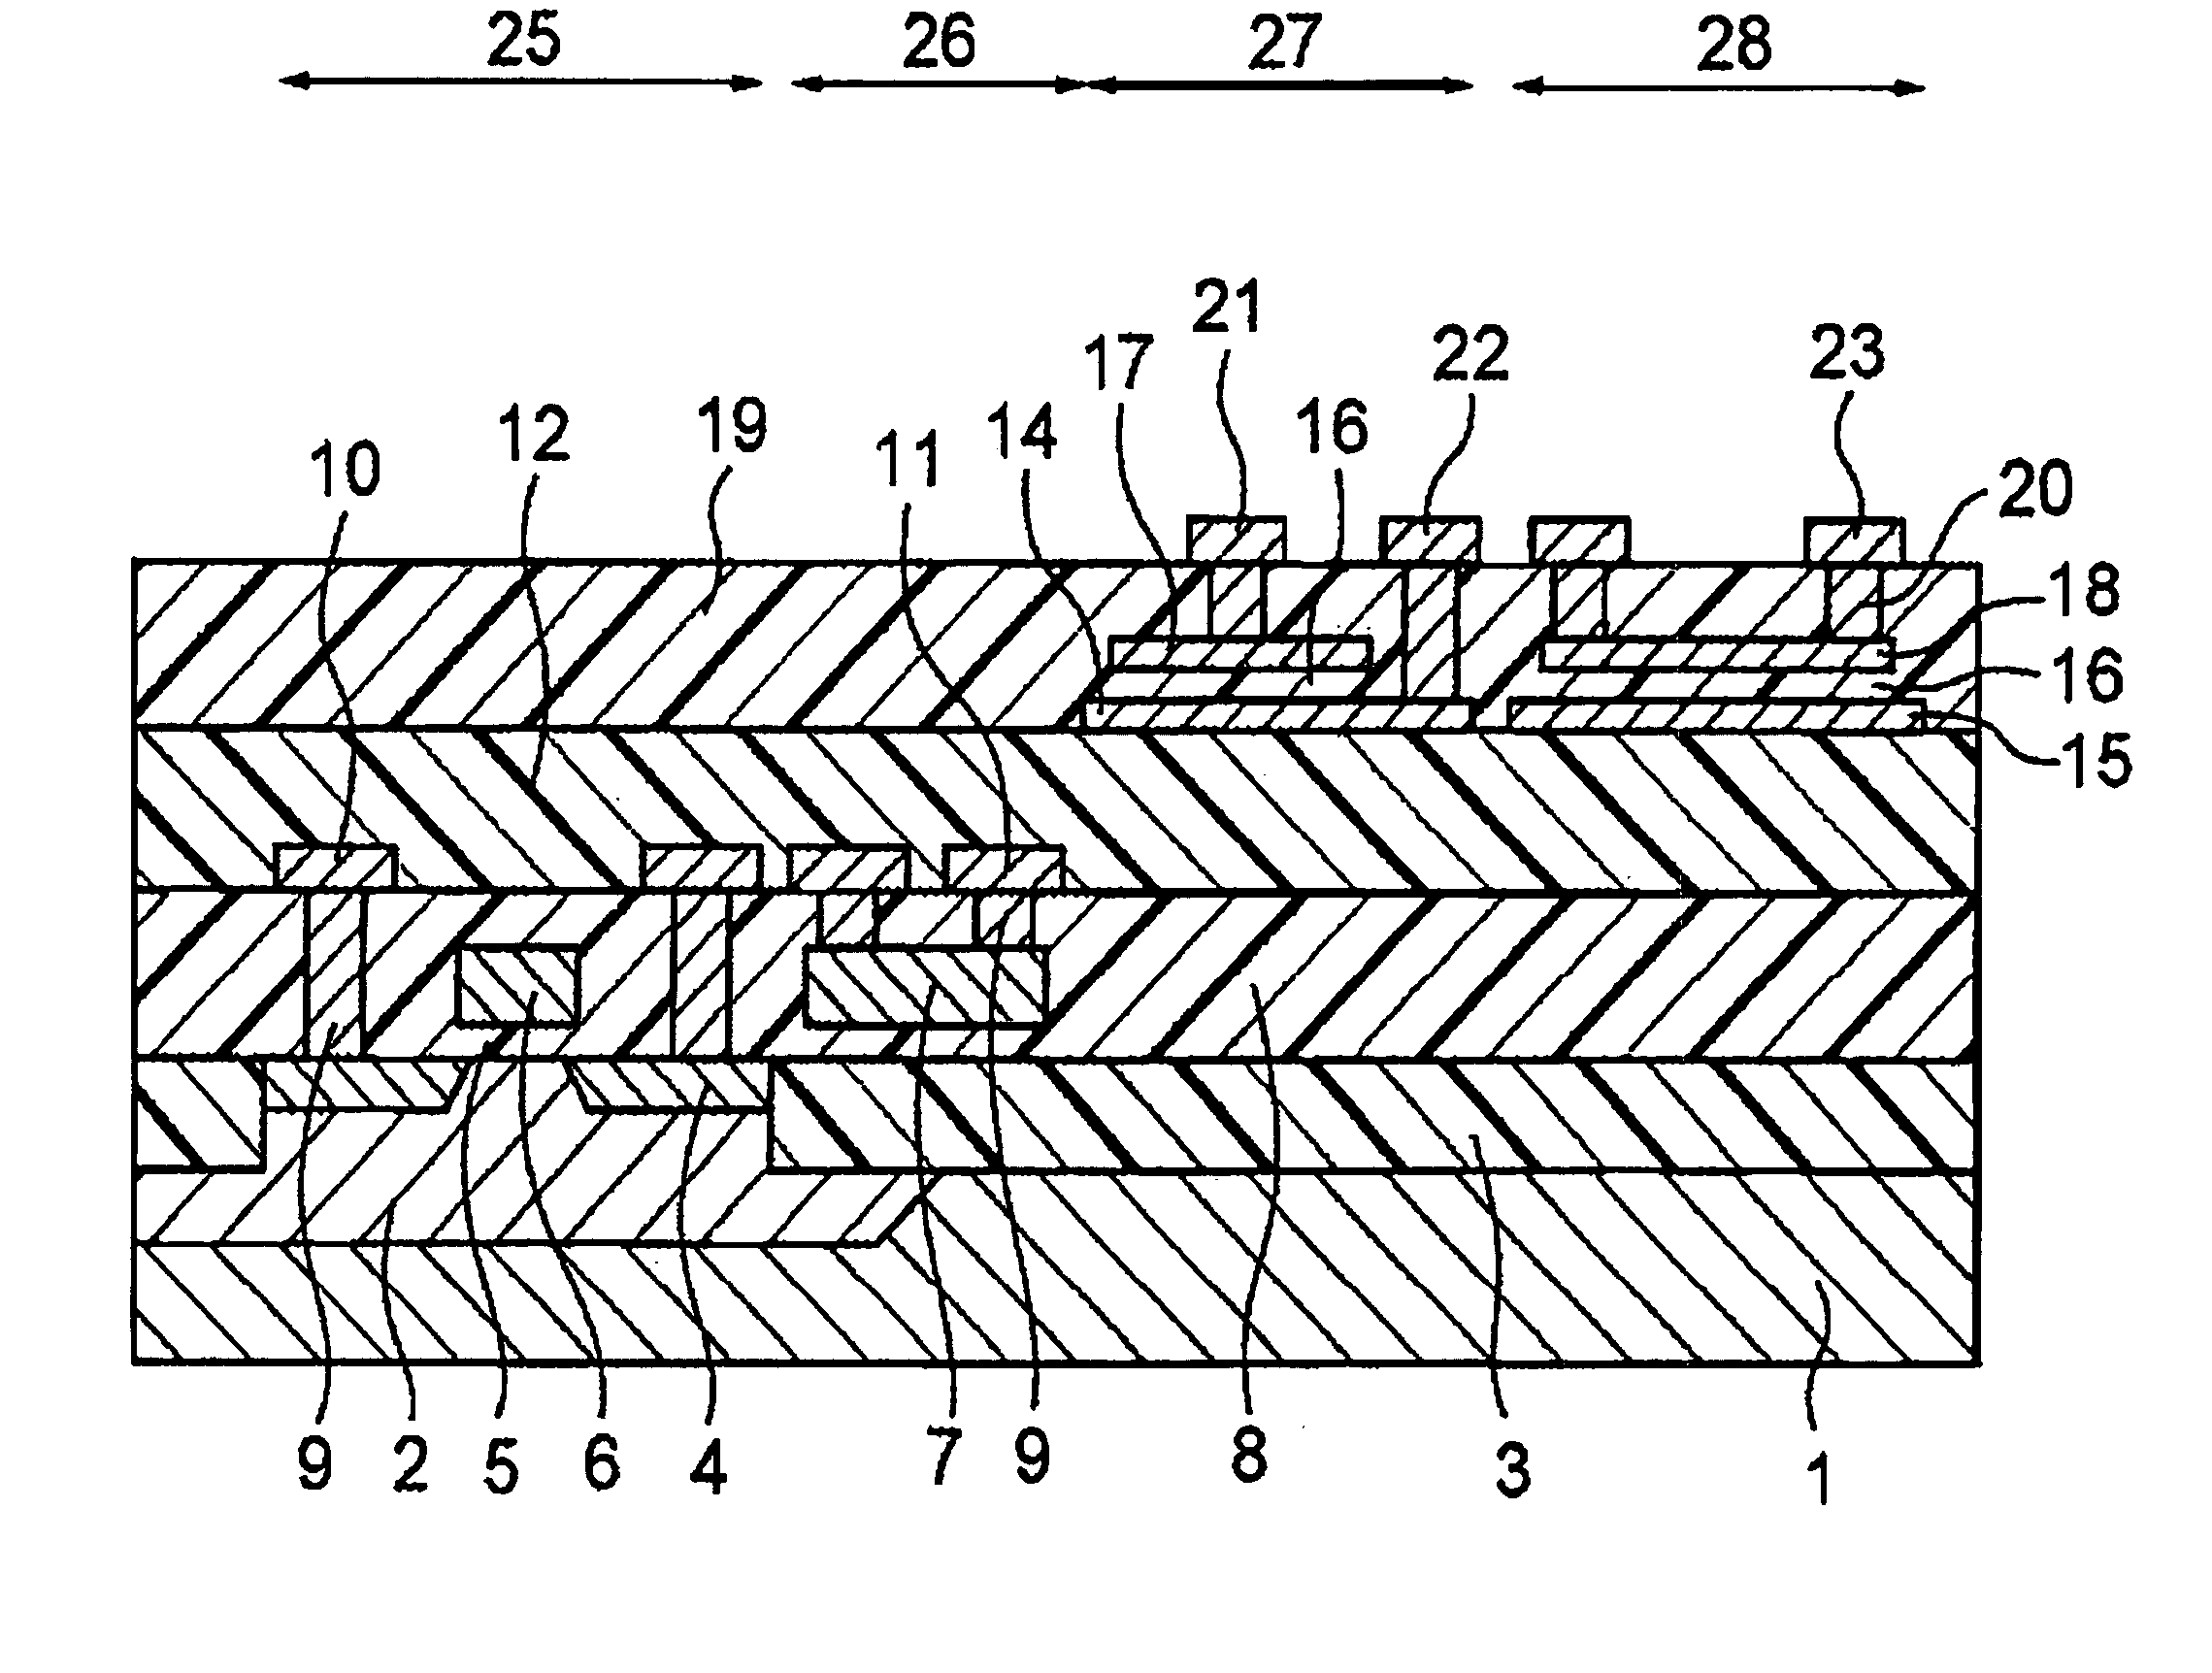 Semiconductor device having MIM structure resistor